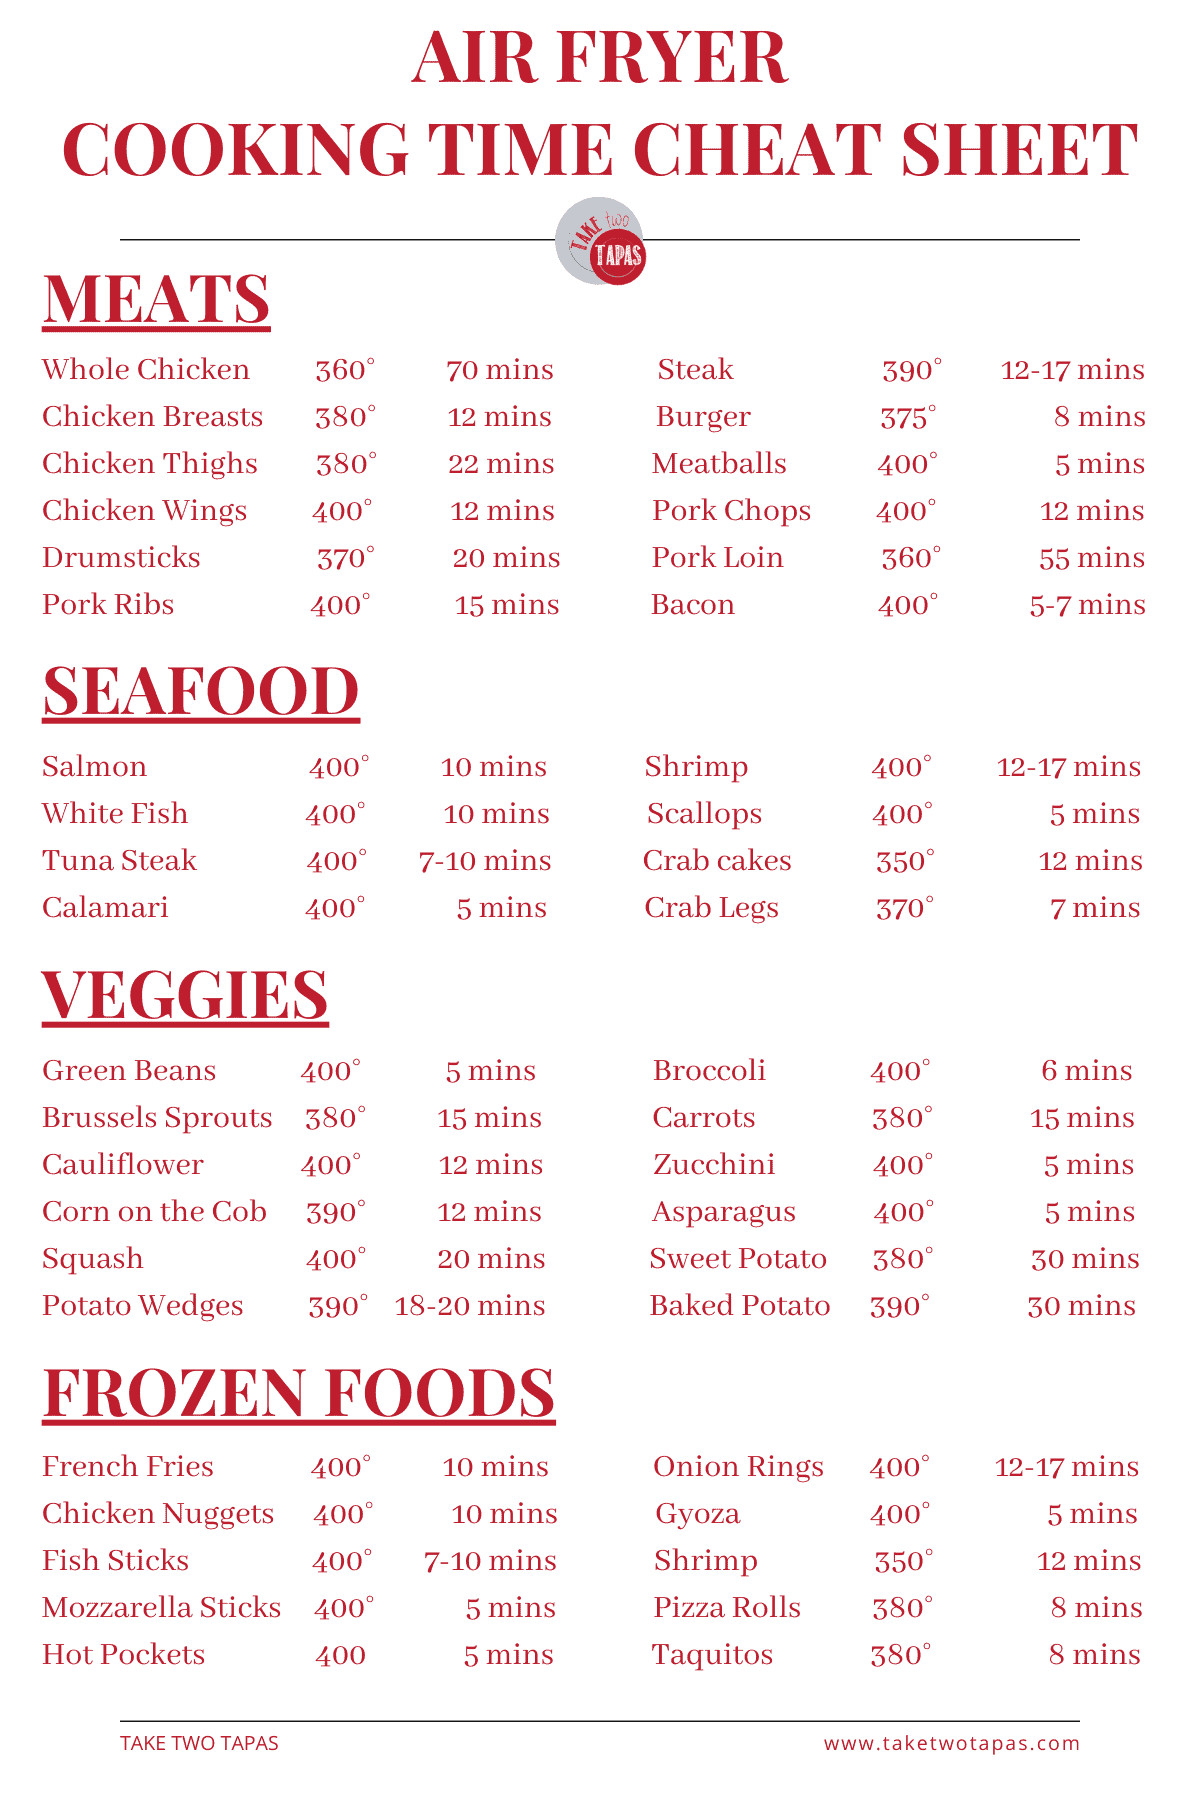 Air fryer cooking times chart in red font